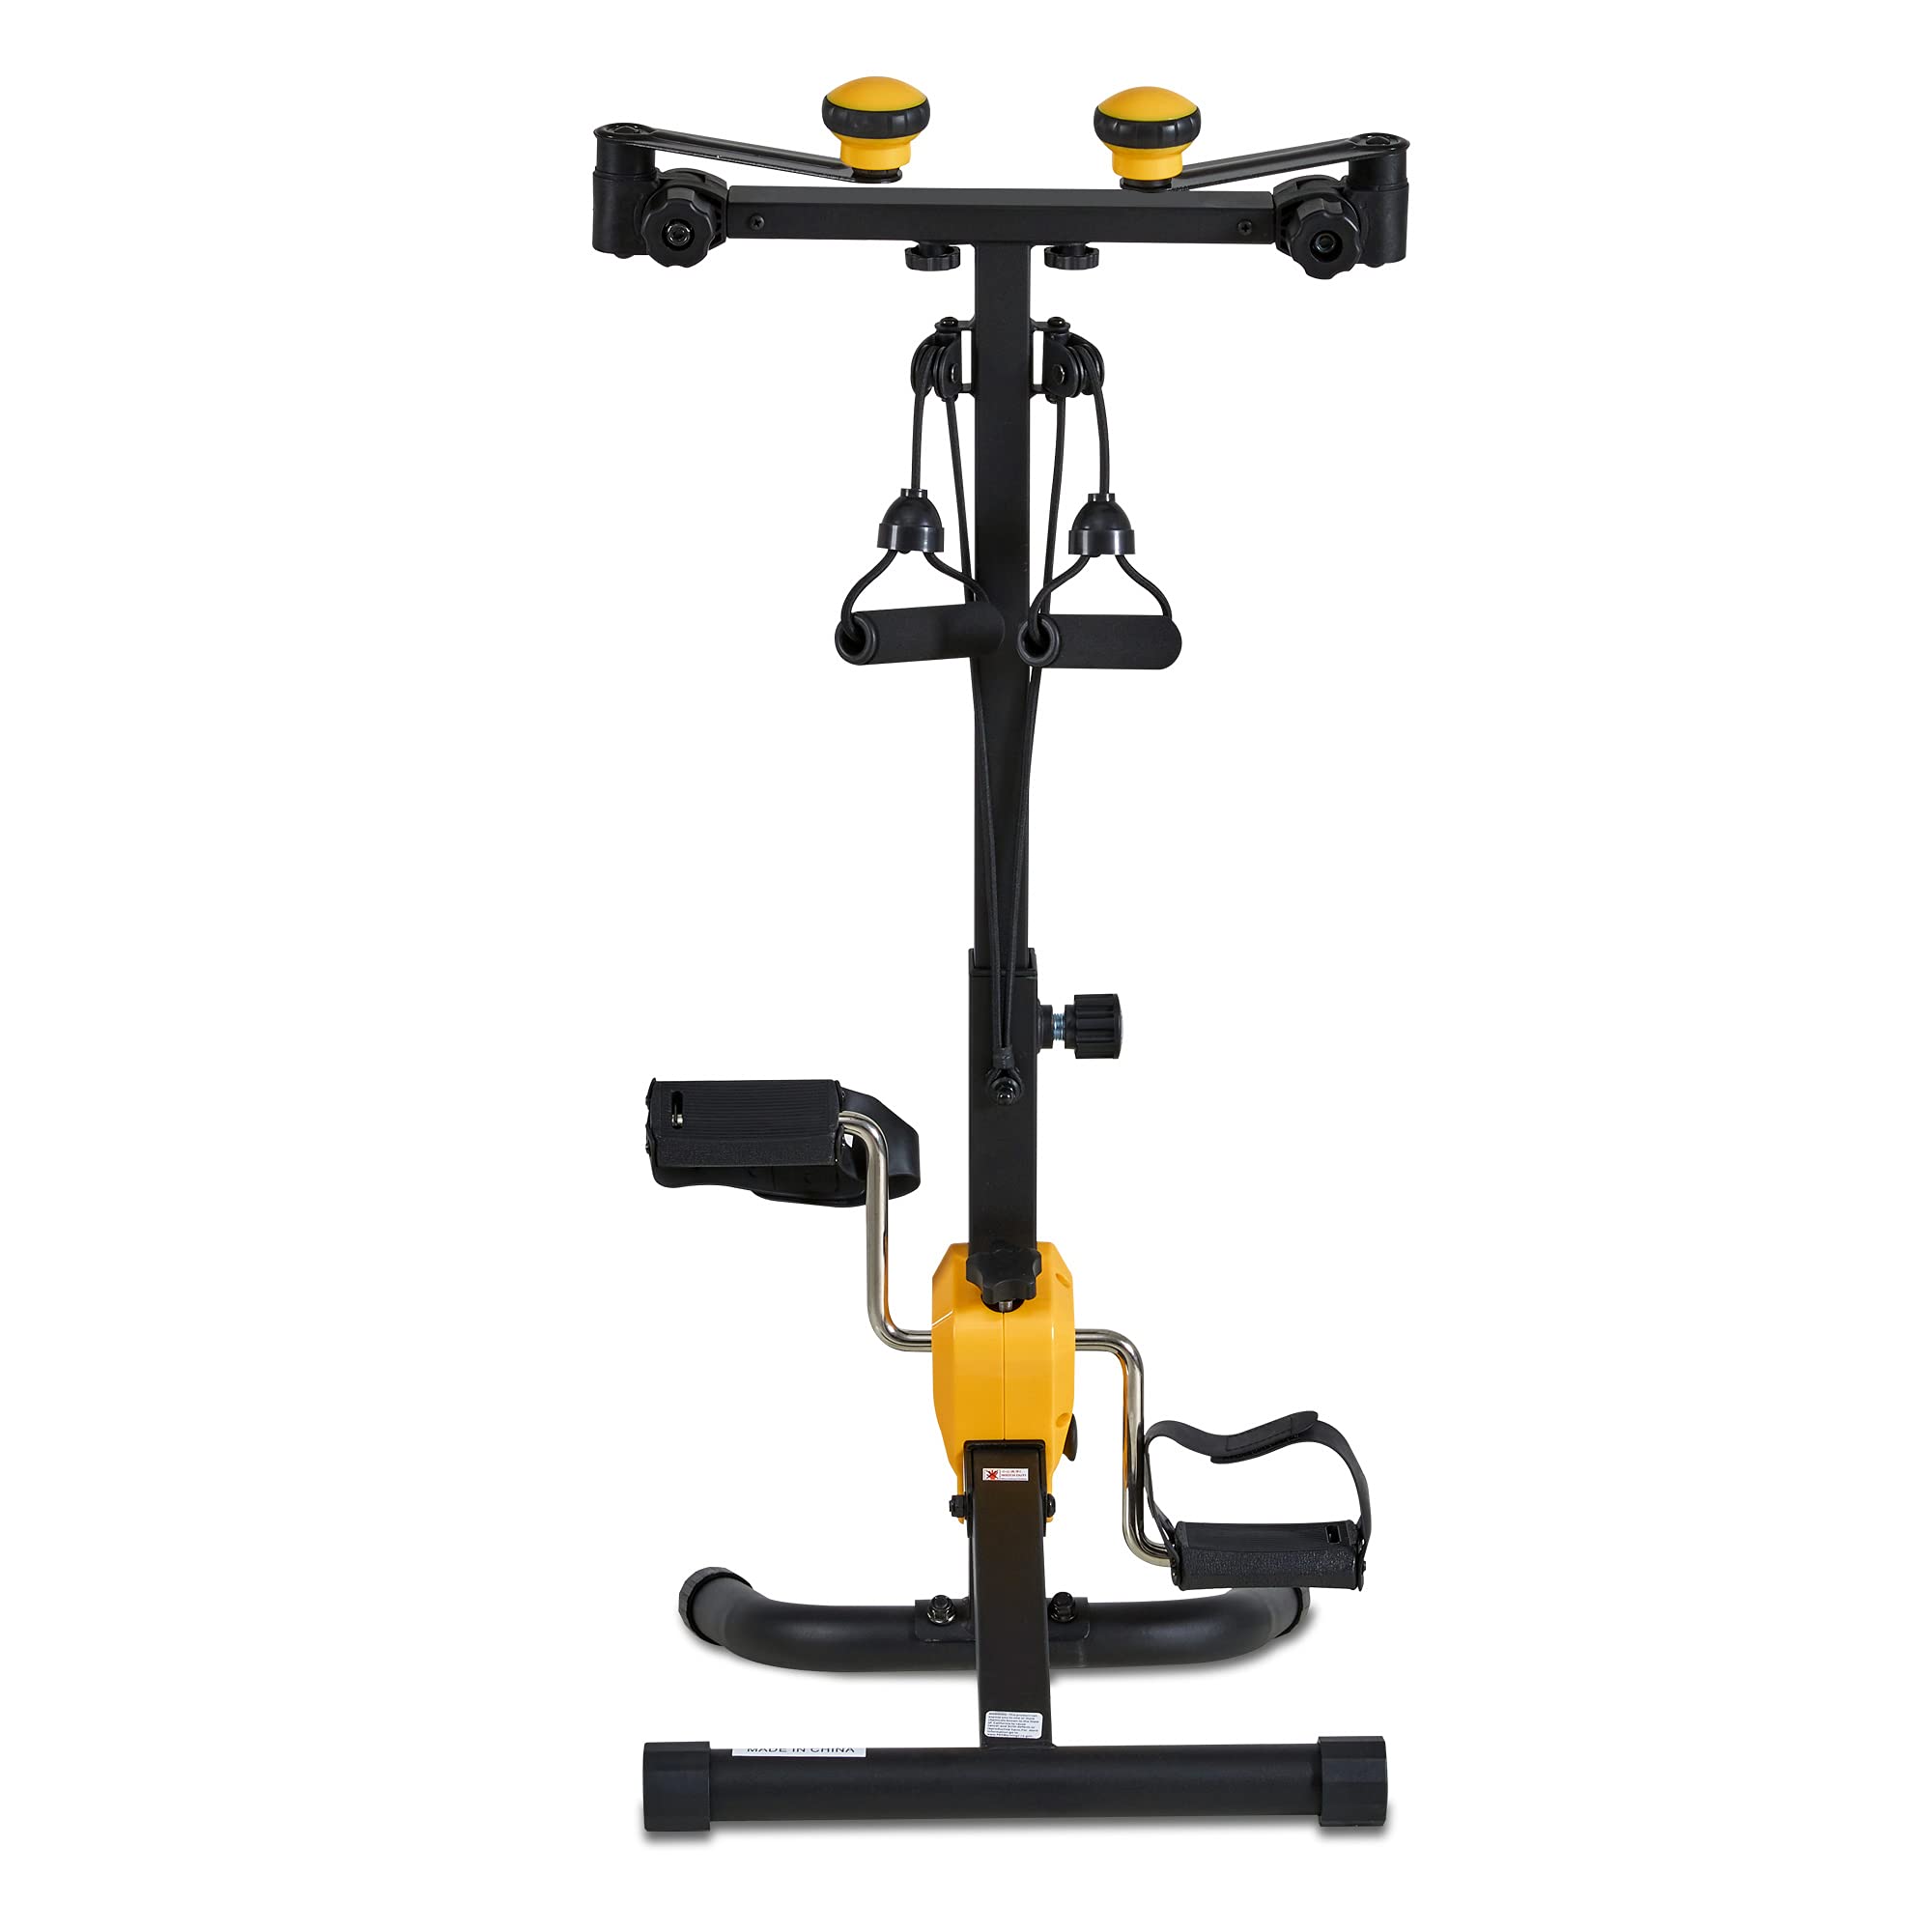 Portable Pedal Exerciser by Vive Arm